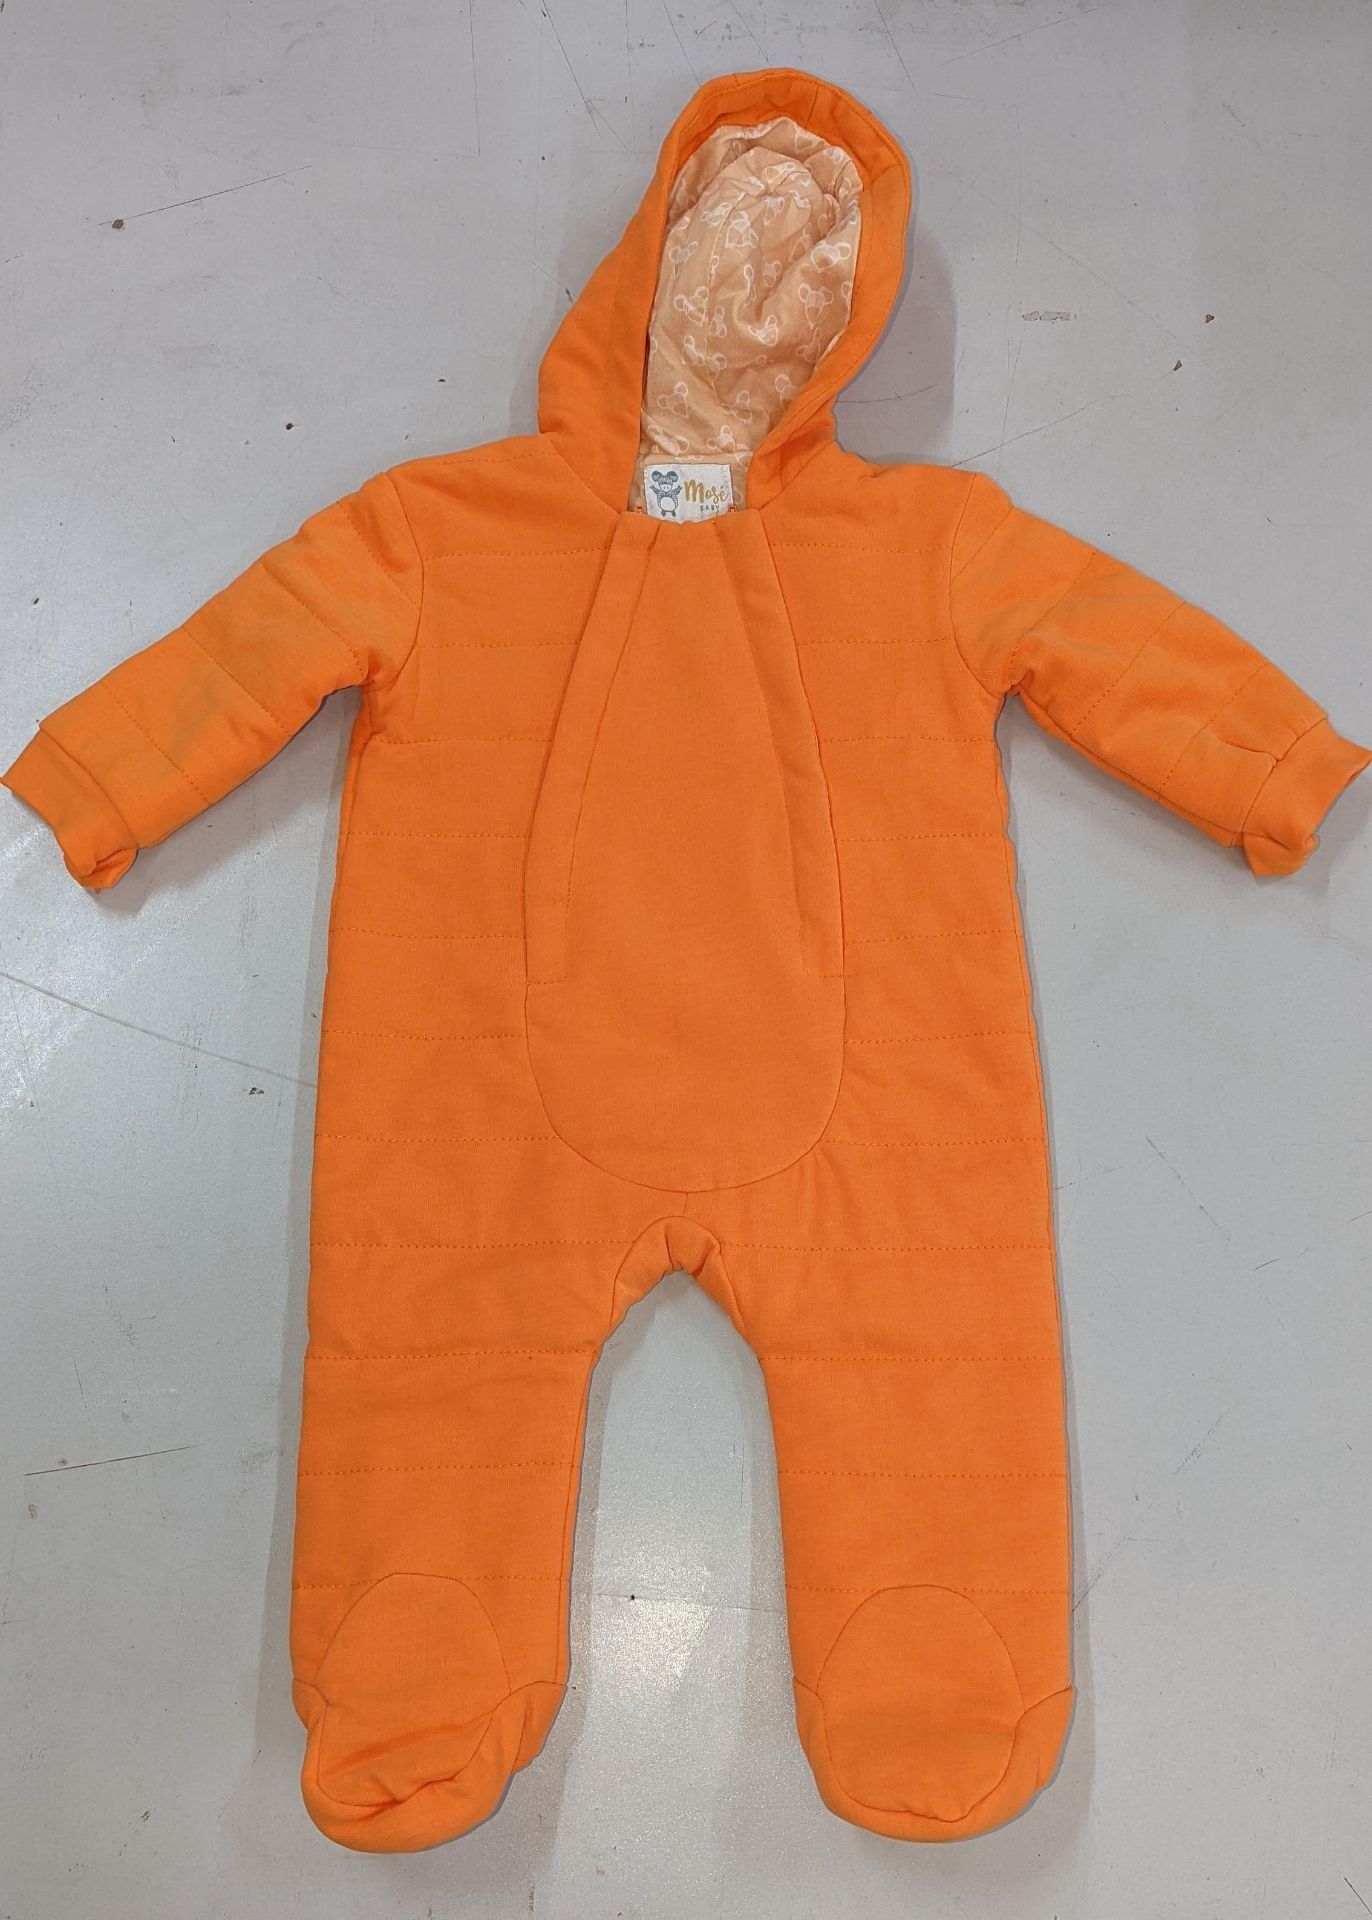 20 off Mosé Baby unisex orange romper body suits, in 100% cotton with Mosé Baby print lining. Age 3 - Image 7 of 10